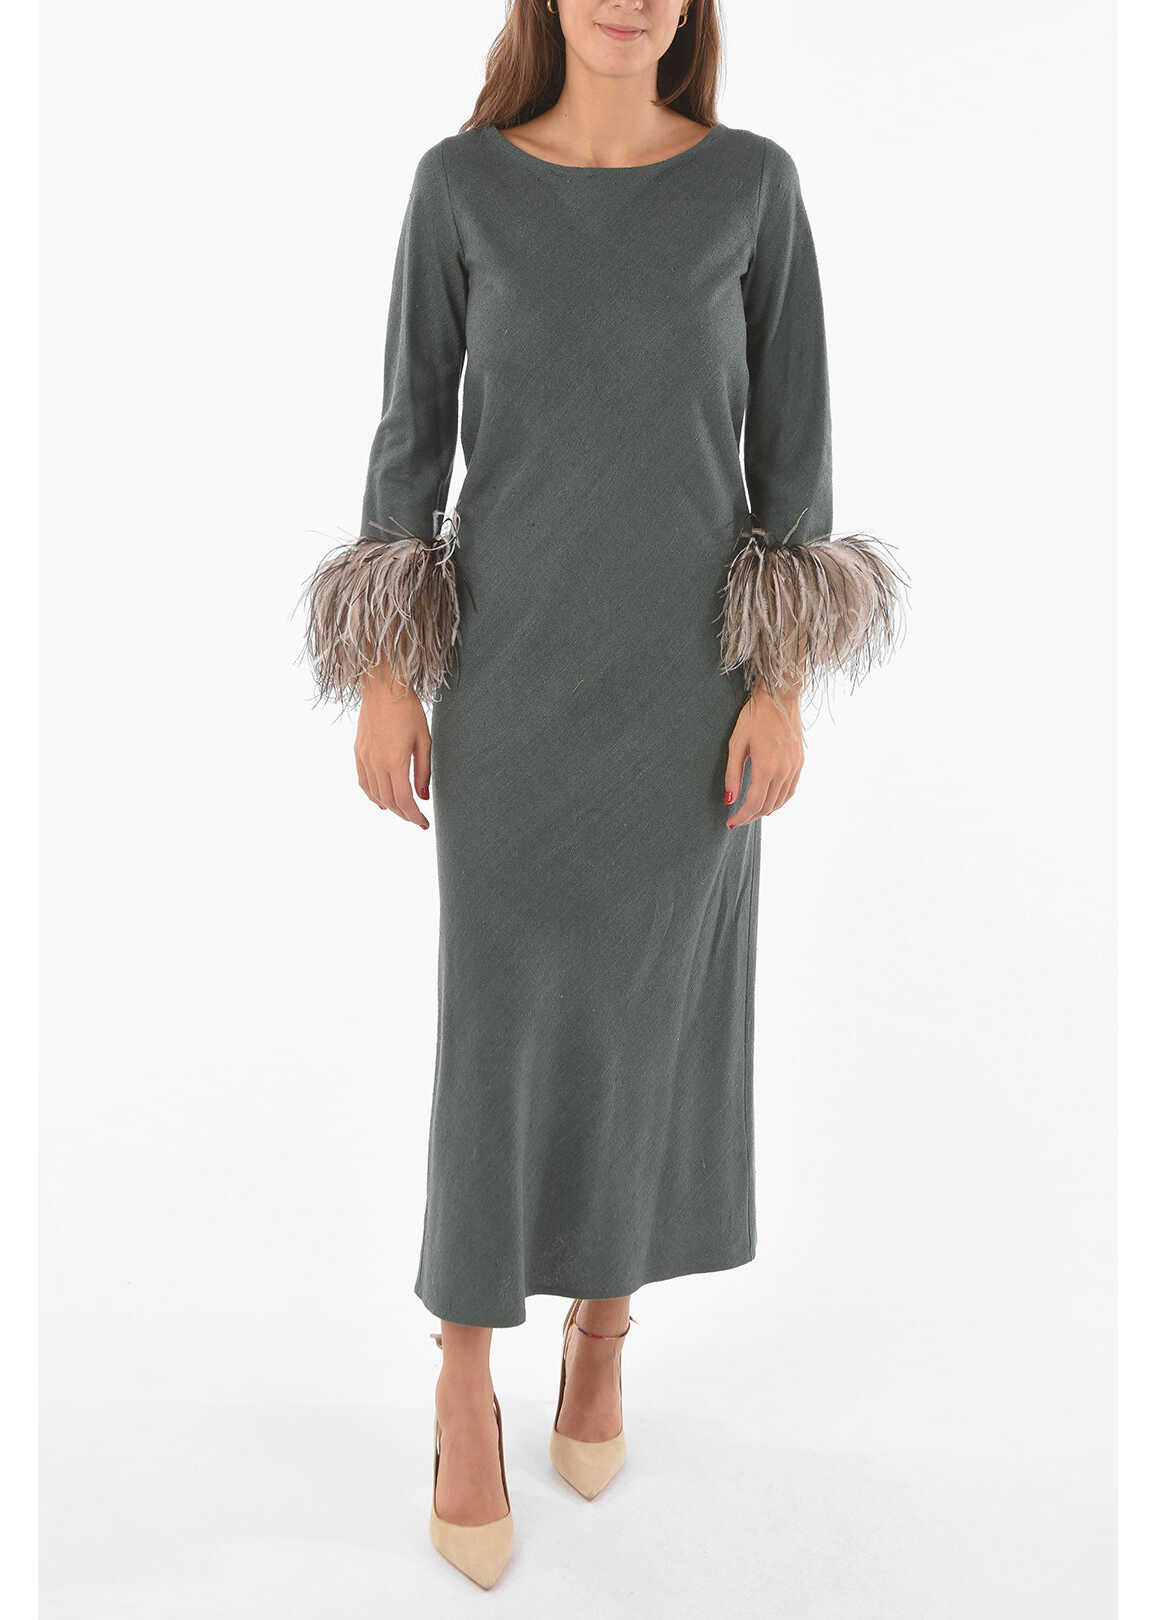 STEPHAN JANSON Silk Maxi Dress With Feathers On Bottom Sleeves Gray